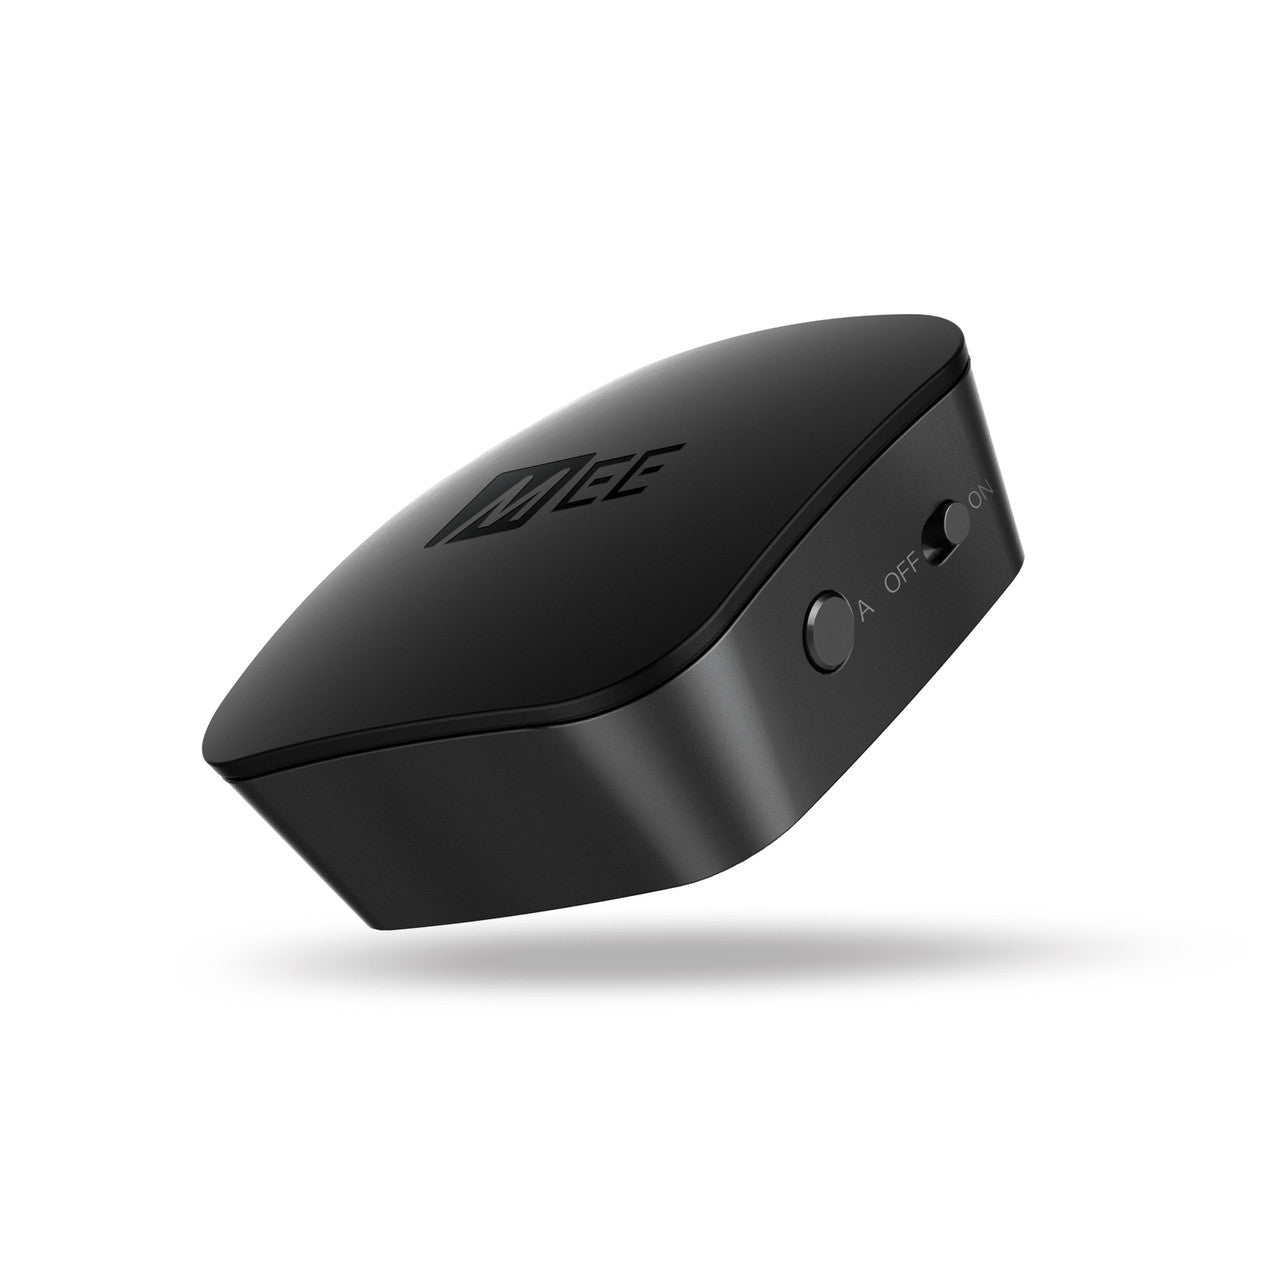 Connect Bluetooth Audio Transmitter for TV